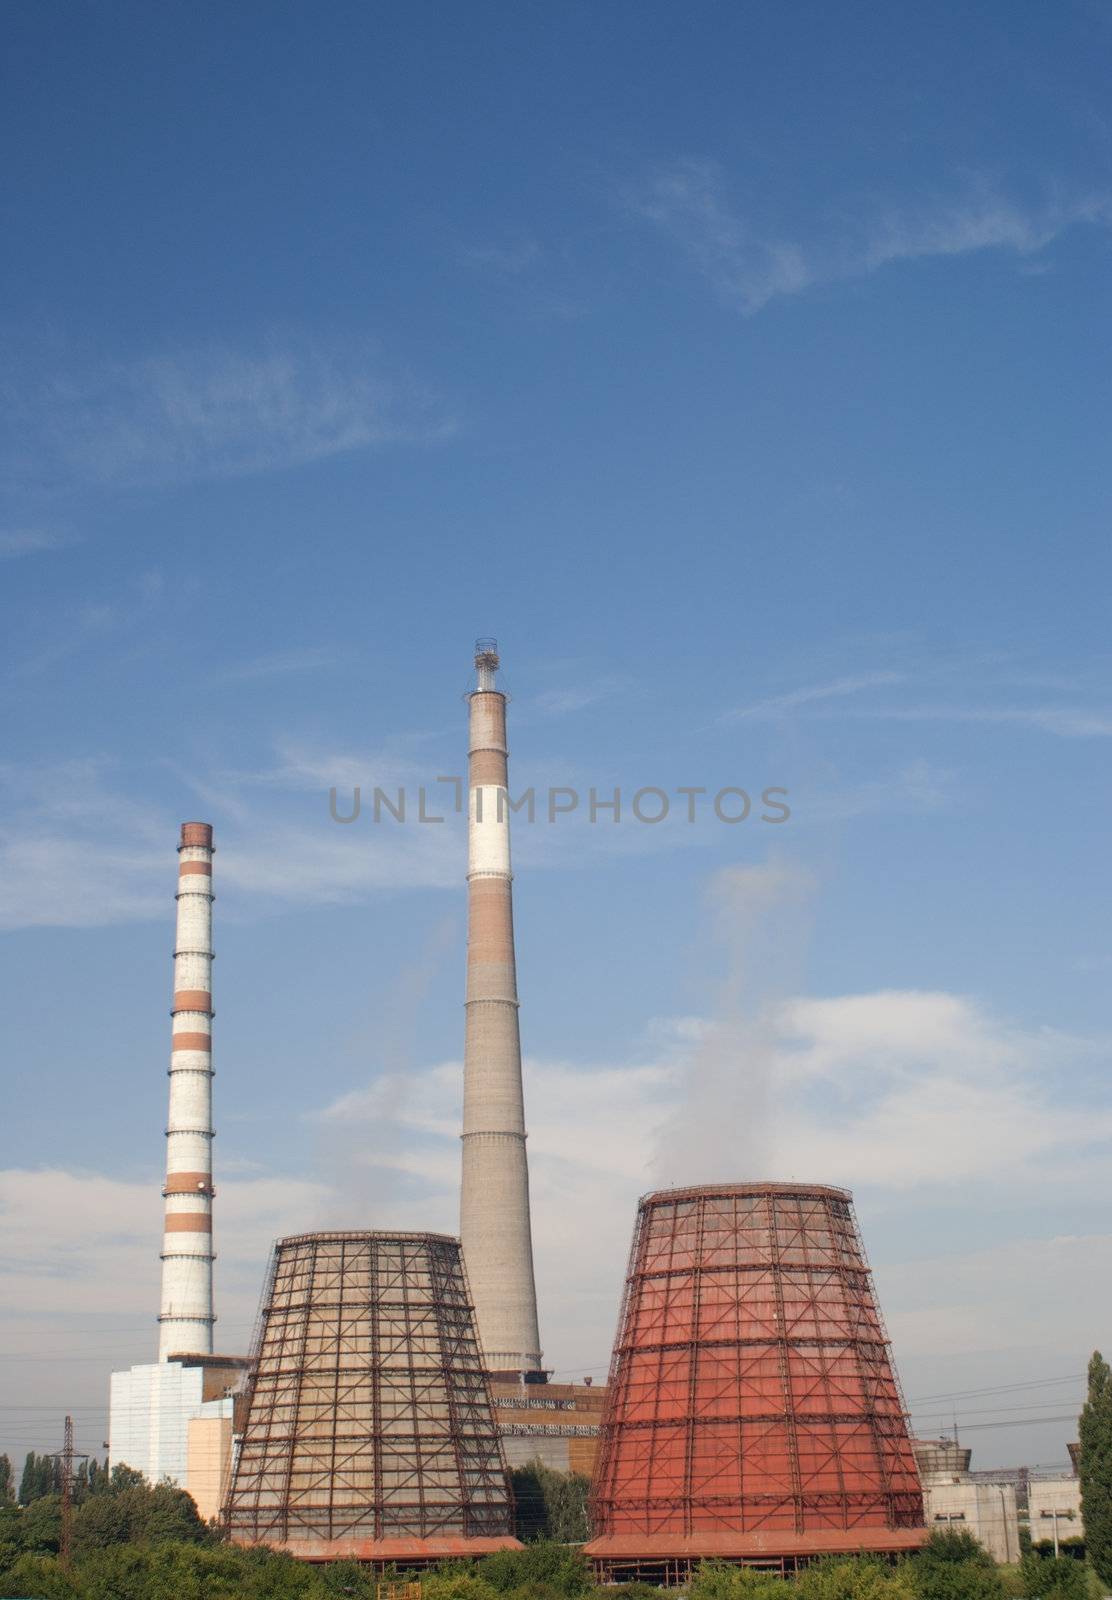 Refinery industrial pipes against blue sky by AndreyKr